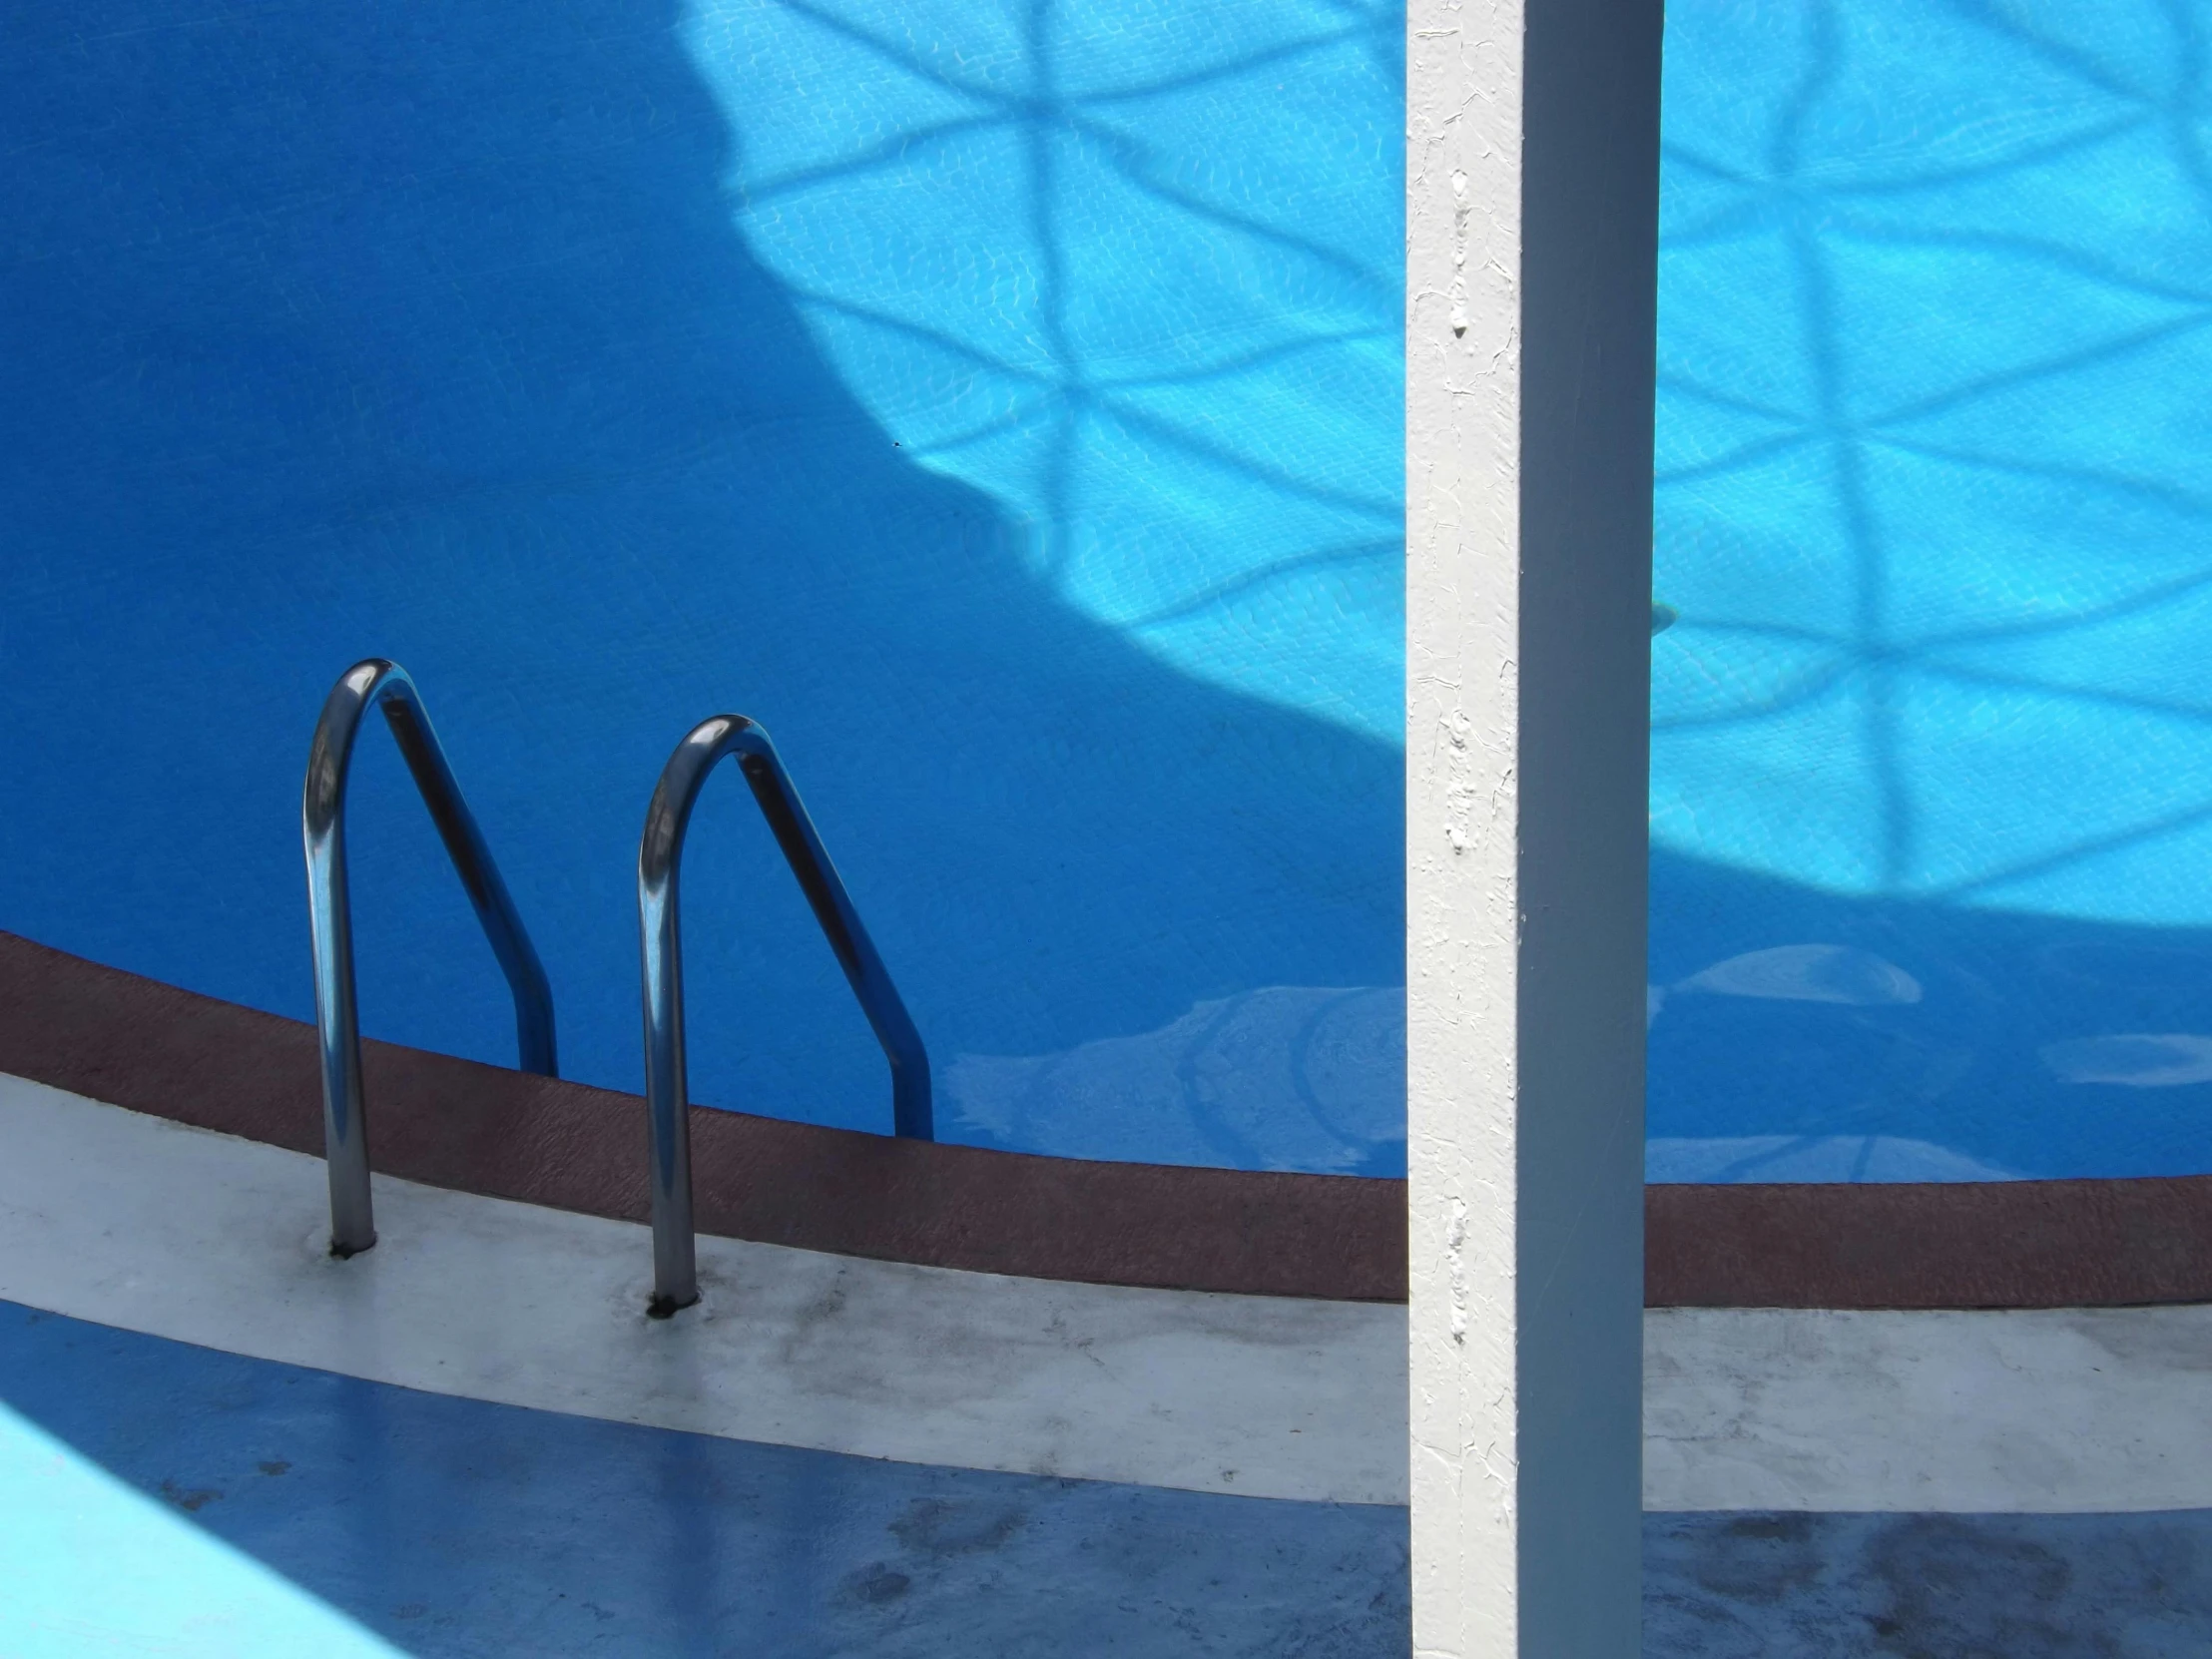 two metal handrails in front of a swimming pool